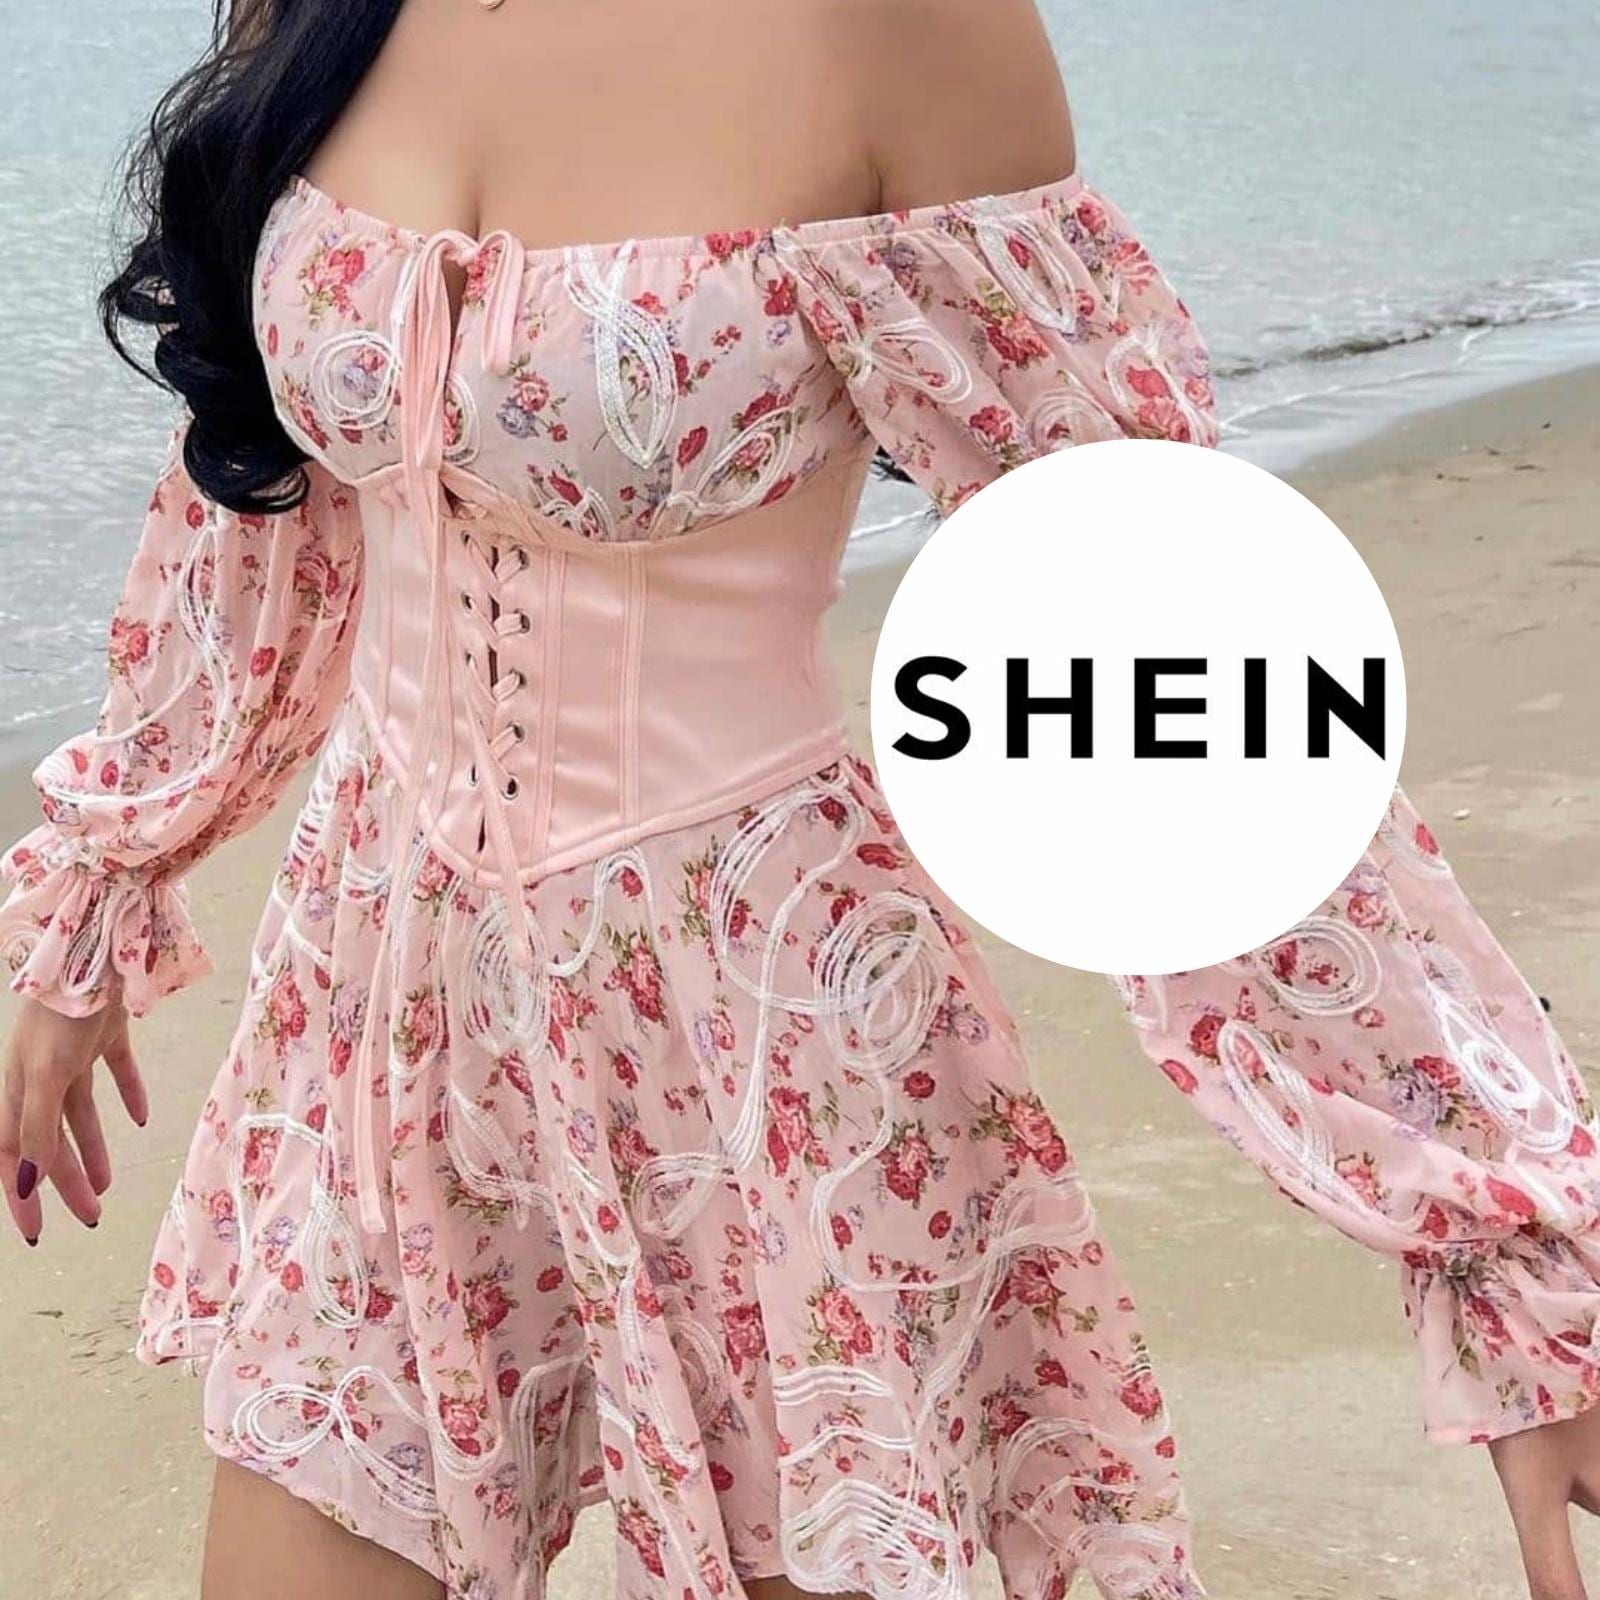 What are similar clothing sites to SHEIN? - Quora